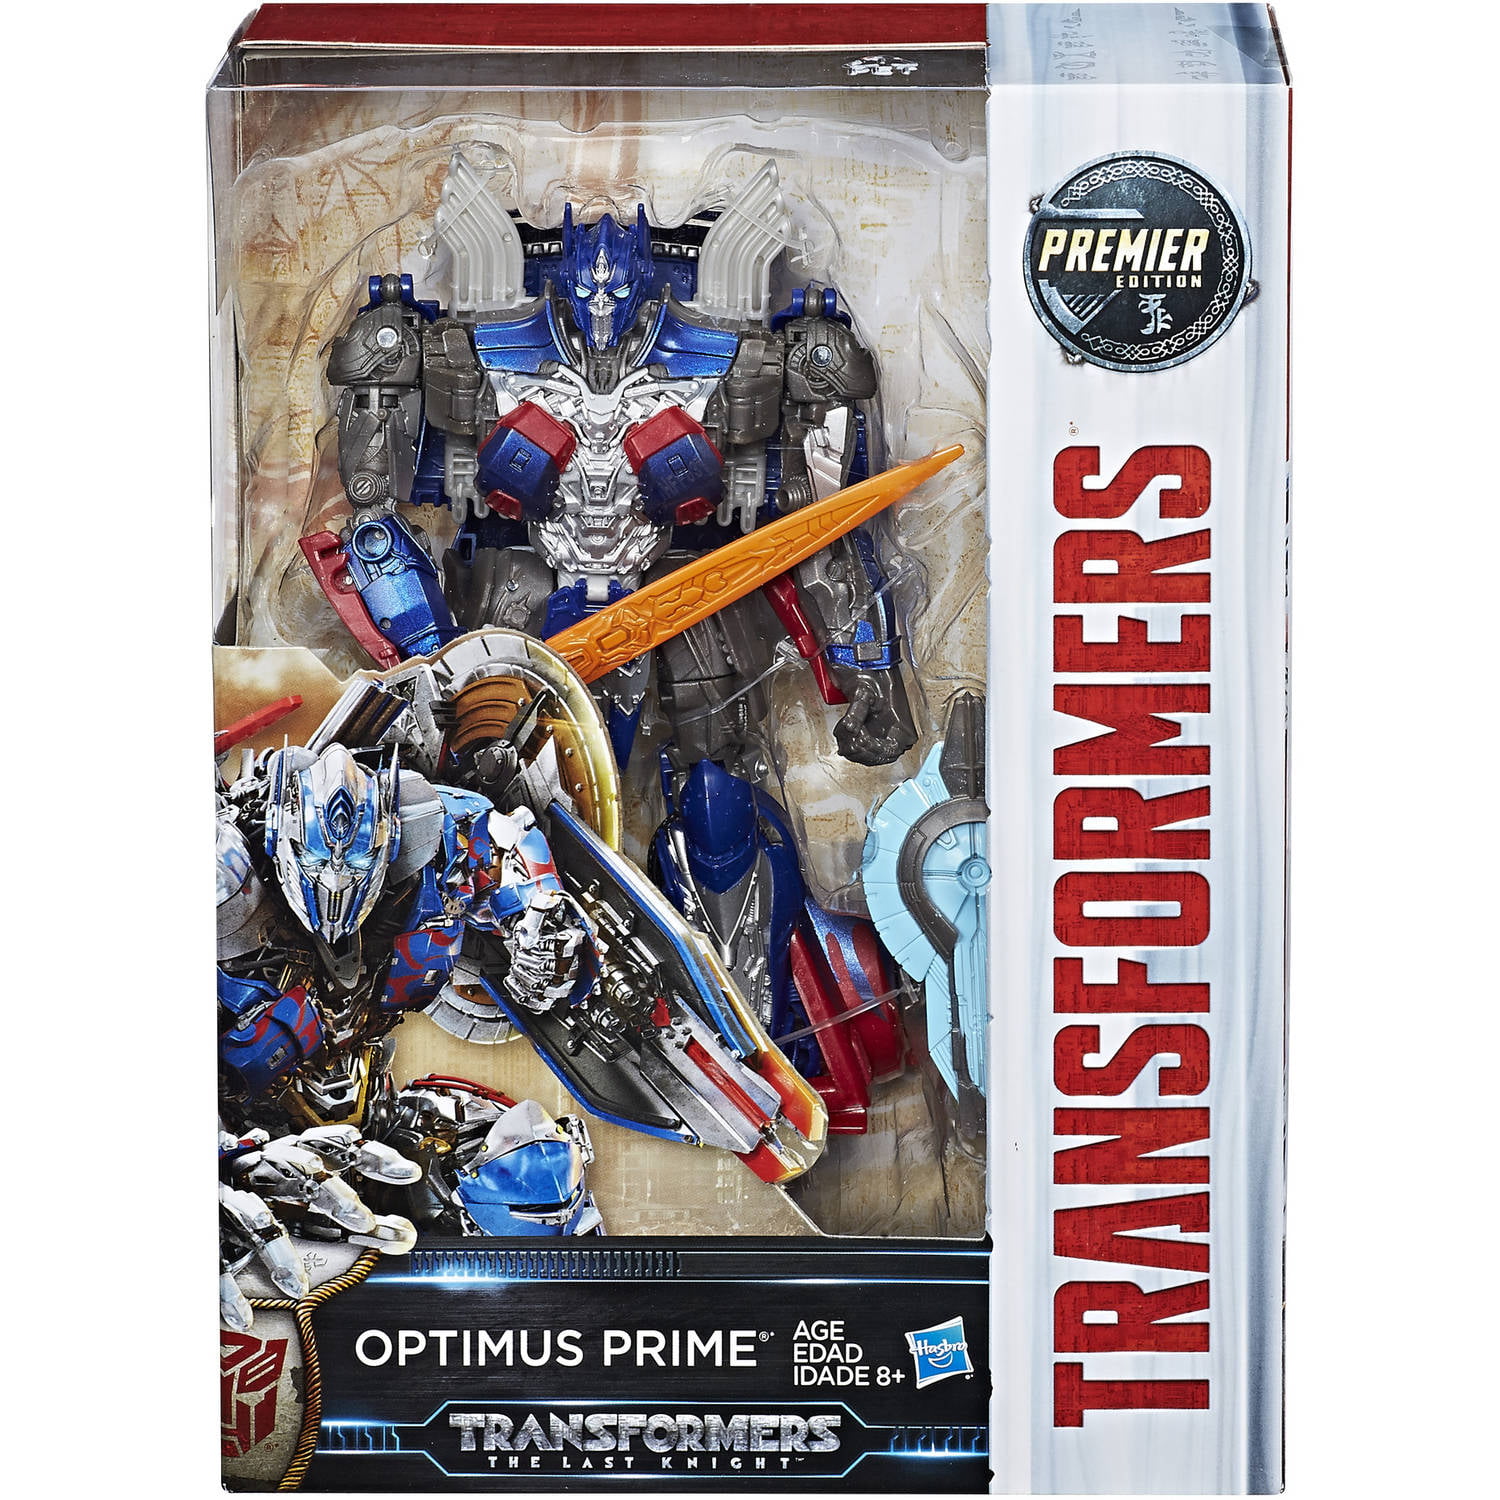 2017 Movie Transformers Last Knight Optimus Prime Voyager Class Boxed MIB Sealed 